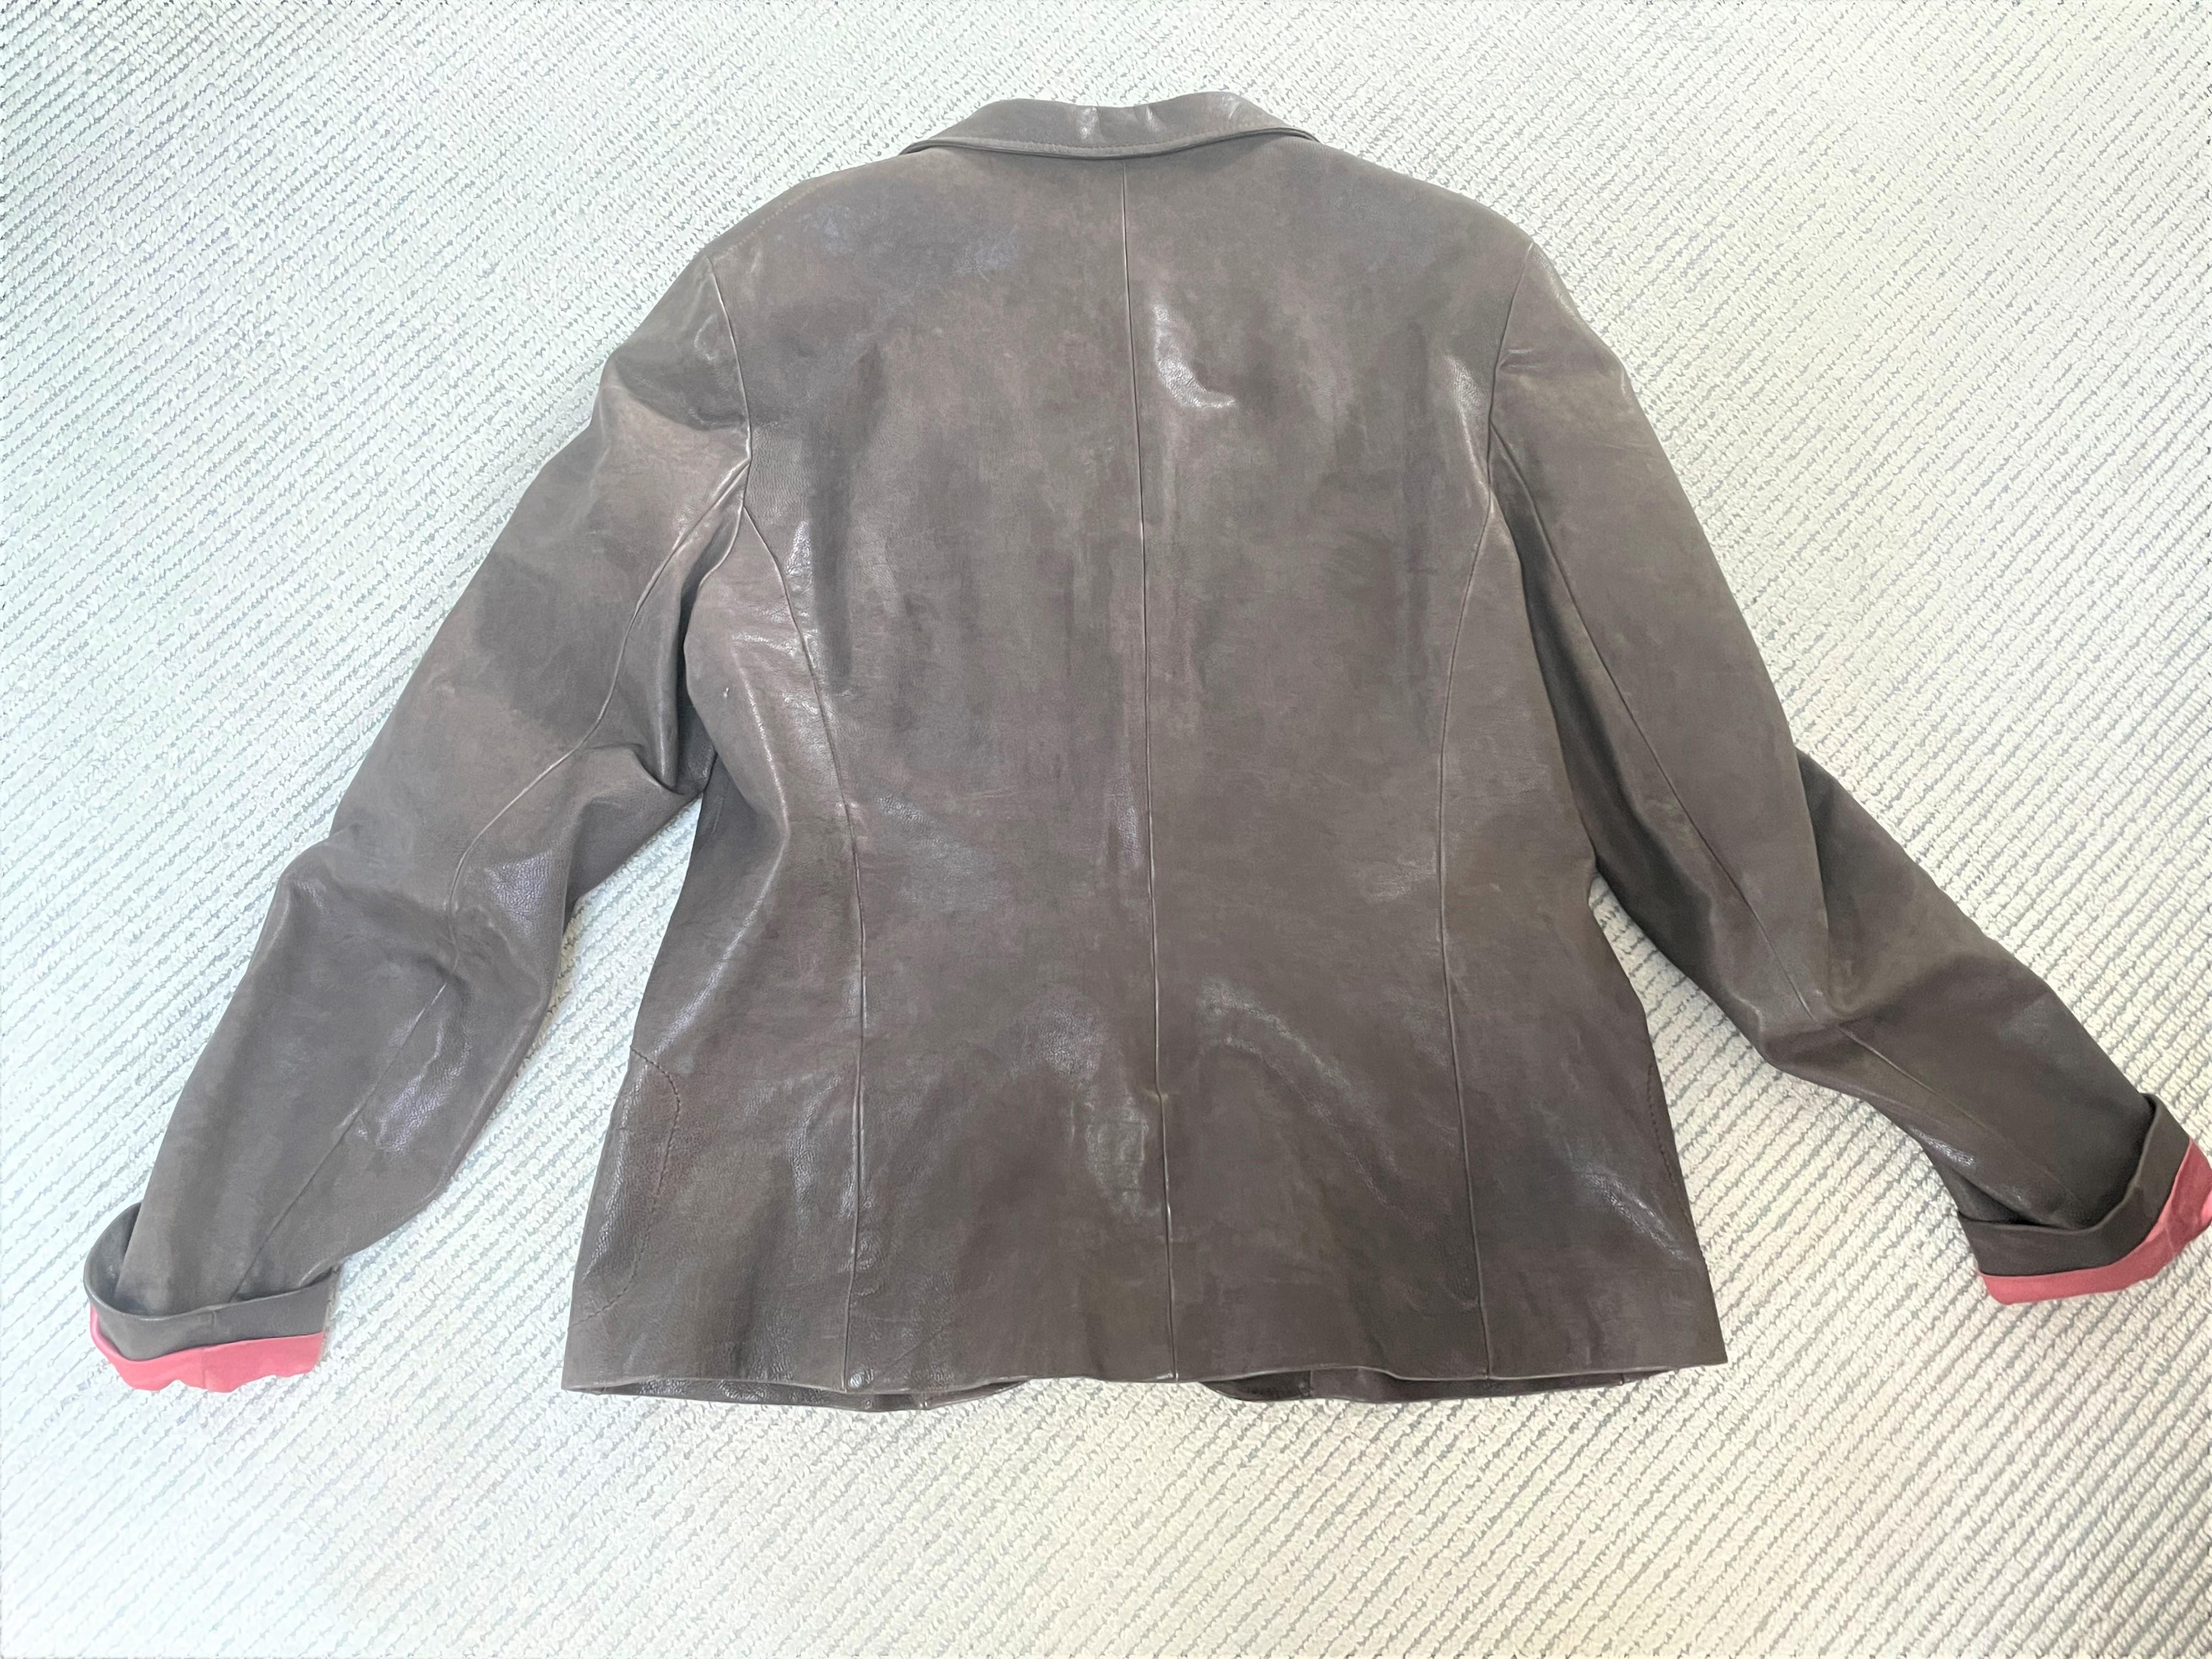  Smooth Leather Blazer by Jil Sander brown, pink lining size 44 For Sale 2